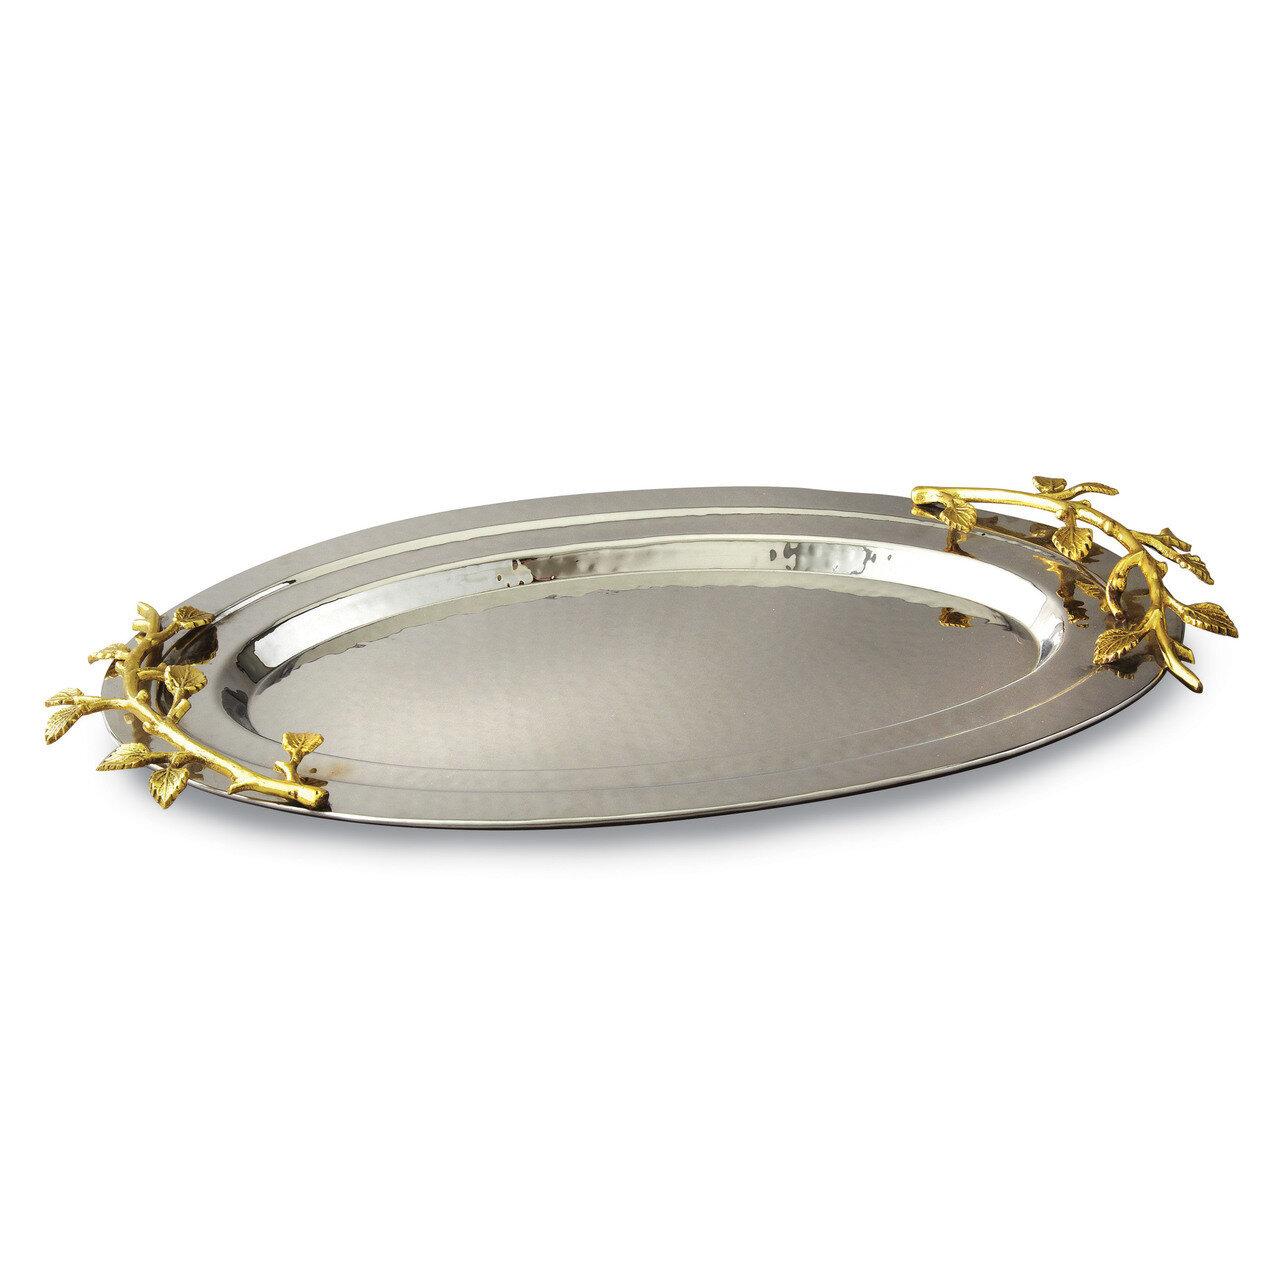 Golden Vine Hammered Oval Tray Stainless Steel GM14129